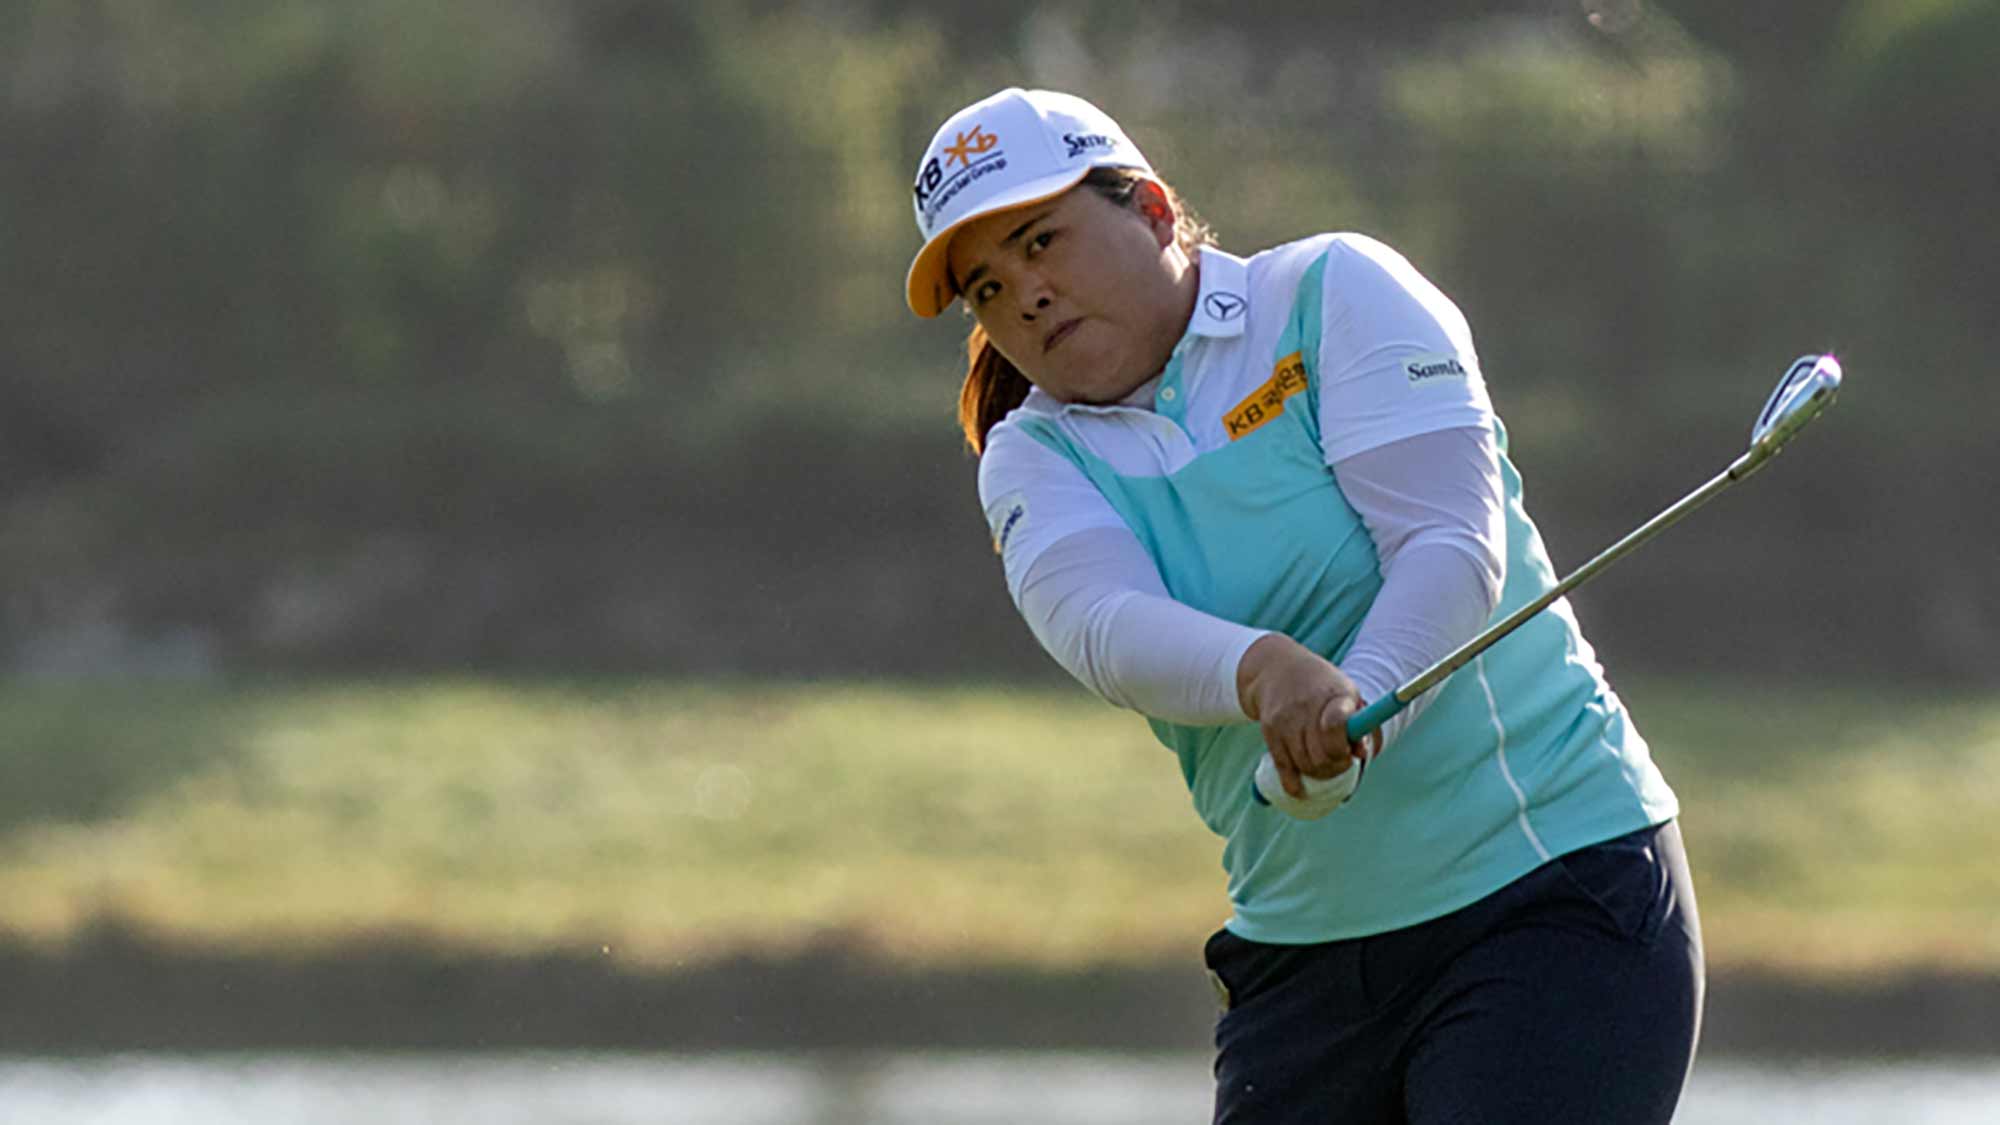 Inbee Park hits a shot during the opening round of the Diamond Resorts Tournament of Champions presented by Insurance Office of America on January 16, 2020